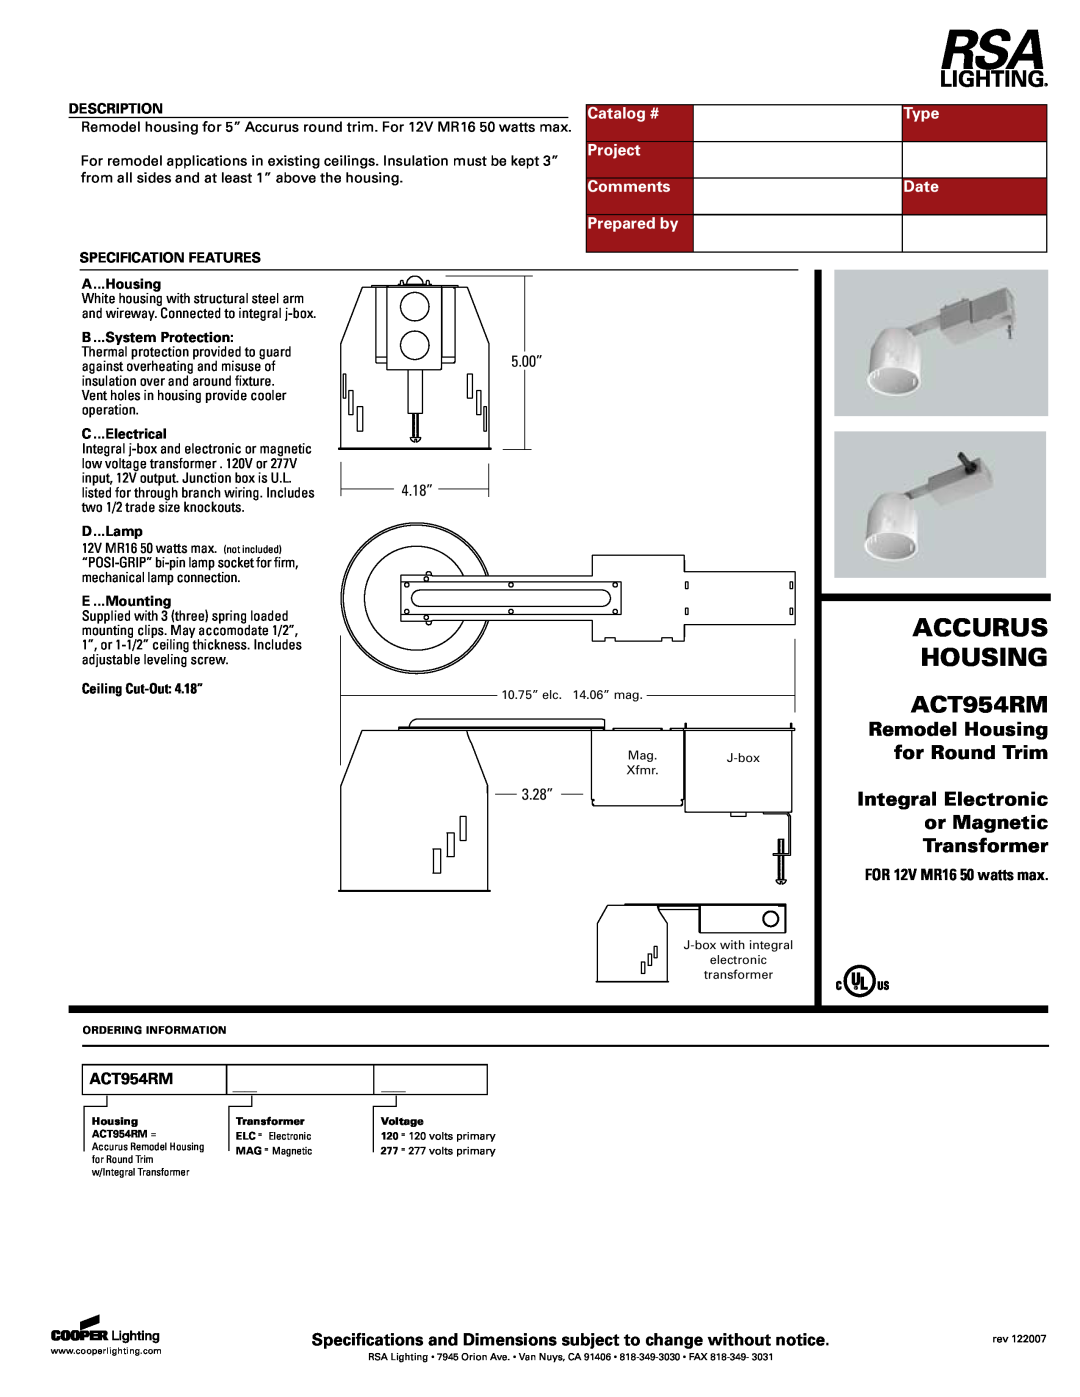 Cooper Lighting ACT954RM specifications Accurus, Remodel Housing, for Round Trim, Integral Electronic, or Magnetic 